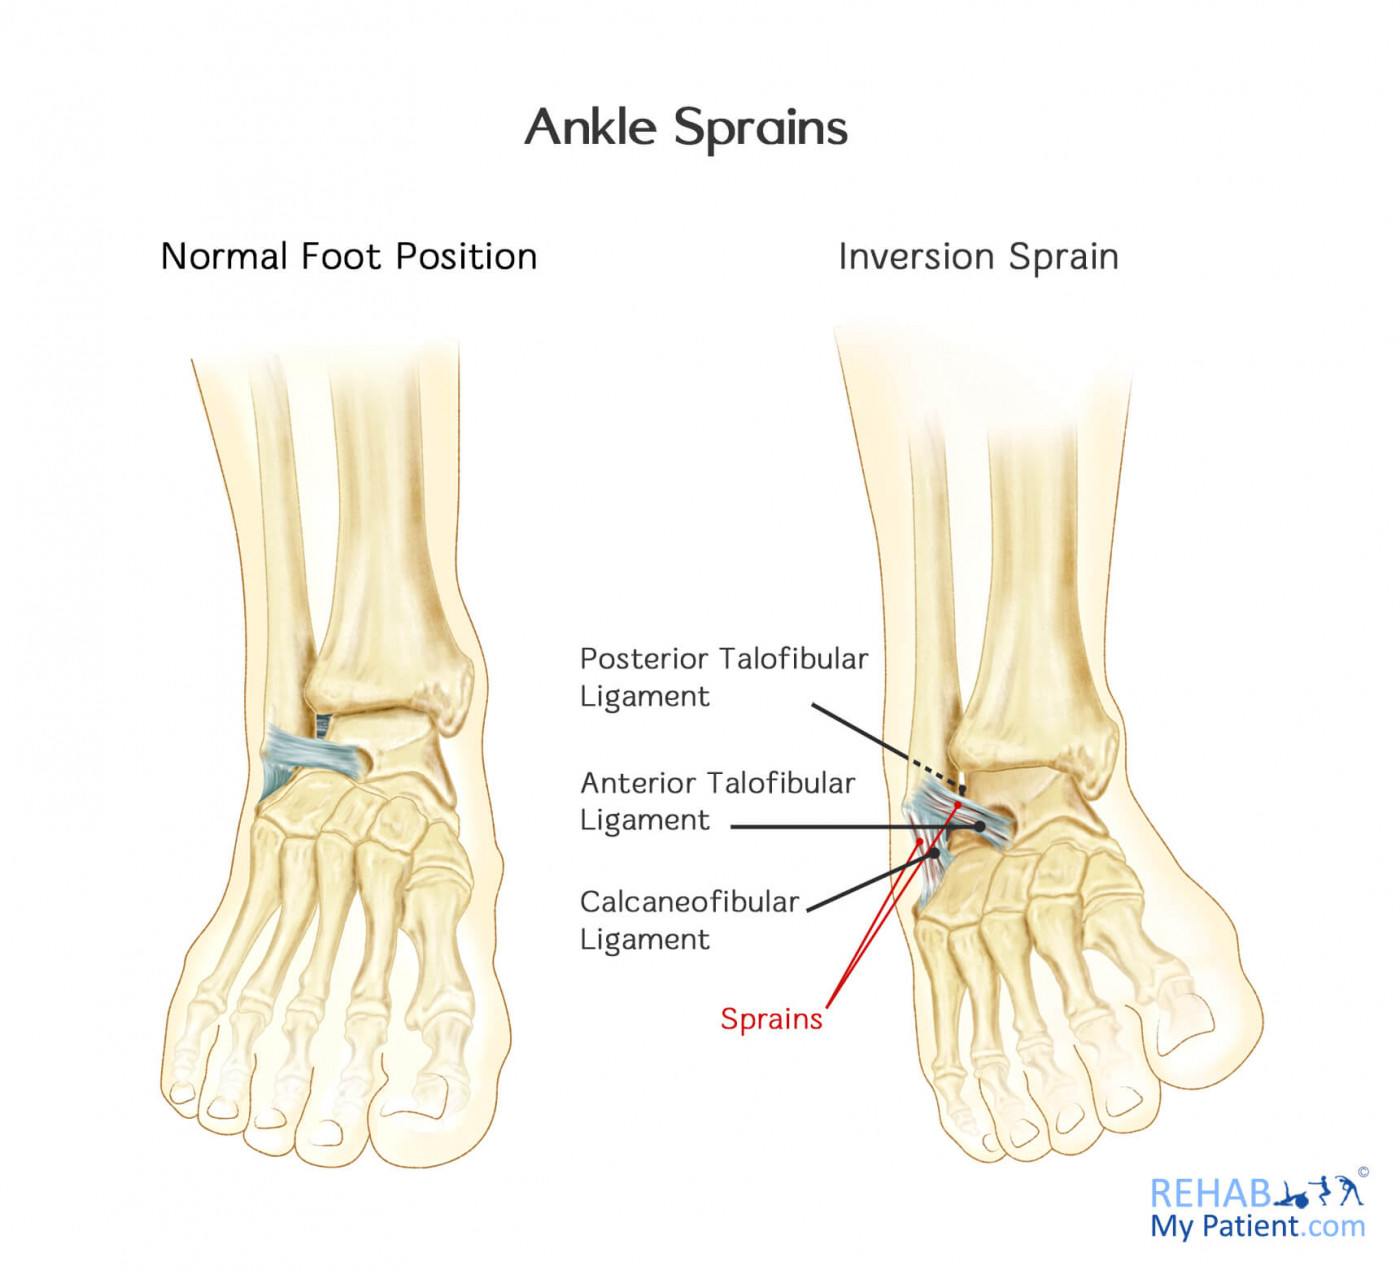 Lateral ankle ligament injury